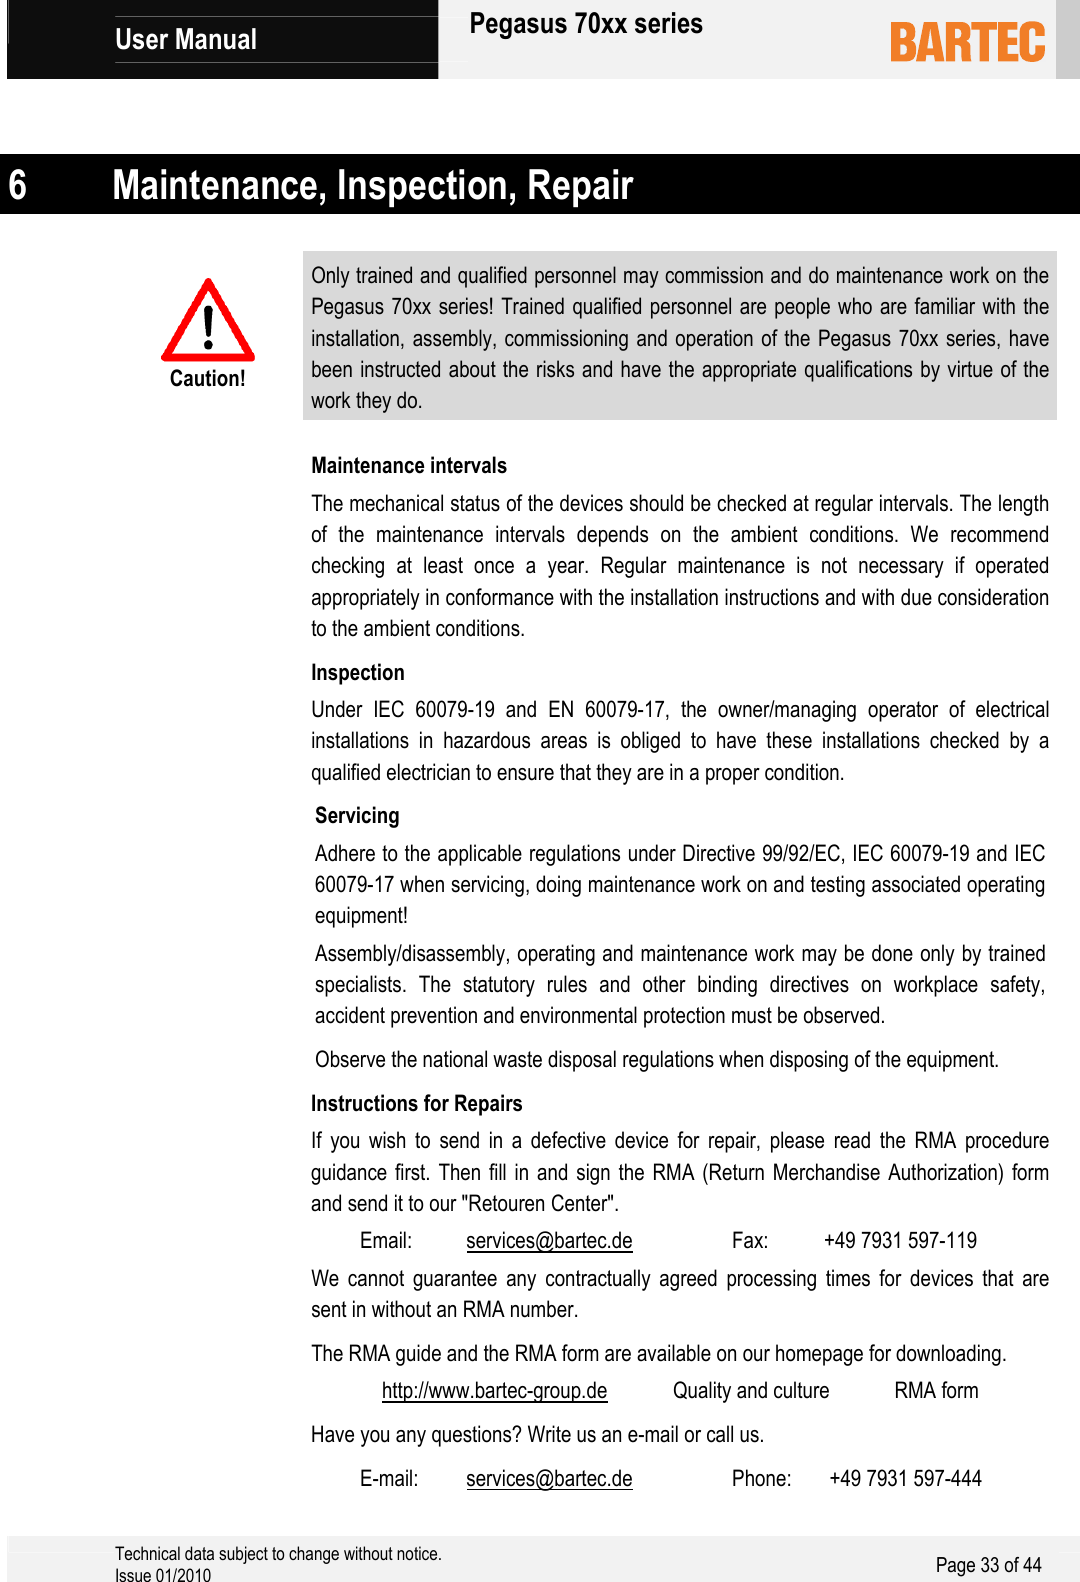             User Manual   Pegasus 70xx series     Technical data subject to change without notice. Issue 01/2010  Page 33 of 44    6 Maintenance, Inspection, Repair  Caution! Only trained and qualified personnel may commission and do maintenance work on the Pegasus 70xx series! Trained qualified personnel are people who are familiar with the installation, assembly, commissioning and operation of the Pegasus 70xx series, have been instructed about the risks and have the appropriate qualifications by virtue of the work they do.  Maintenance intervals The mechanical status of the devices should be checked at regular intervals. The length of the maintenance intervals depends on the ambient conditions. We recommend checking at least once a year. Regular maintenance is not necessary if operated appropriately in conformance with the installation instructions and with due consideration to the ambient conditions. Inspection Under IEC 60079-19 and EN 60079-17, the owner/managing operator of electrical installations in hazardous areas is obliged to have these installations checked by a qualified electrician to ensure that they are in a proper condition. Servicing Adhere to the applicable regulations under Directive 99/92/EC, IEC 60079-19 and IEC 60079-17 when servicing, doing maintenance work on and testing associated operating equipment! Assembly/disassembly, operating and maintenance work may be done only by trained specialists. The statutory rules and other binding directives on workplace safety, accident prevention and environmental protection must be observed. Observe the national waste disposal regulations when disposing of the equipment. Instructions for Repairs If you wish to send in a defective device for repair, please read the RMA procedure guidance first. Then fill in and sign the RMA (Return Merchandise Authorization) form and send it to our &quot;Retouren Center&quot;.  Email:  services@bartec.de  Fax:   +49 7931 597-119 We cannot guarantee any contractually agreed processing times for devices that are sent in without an RMA number. The RMA guide and the RMA form are available on our homepage for downloading.  http://www.bartec-group.de  Quality and culture  RMA form Have you any questions? Write us an e-mail or call us.  E-mail:  services@bartec.de  Phone:   +49 7931 597-444 